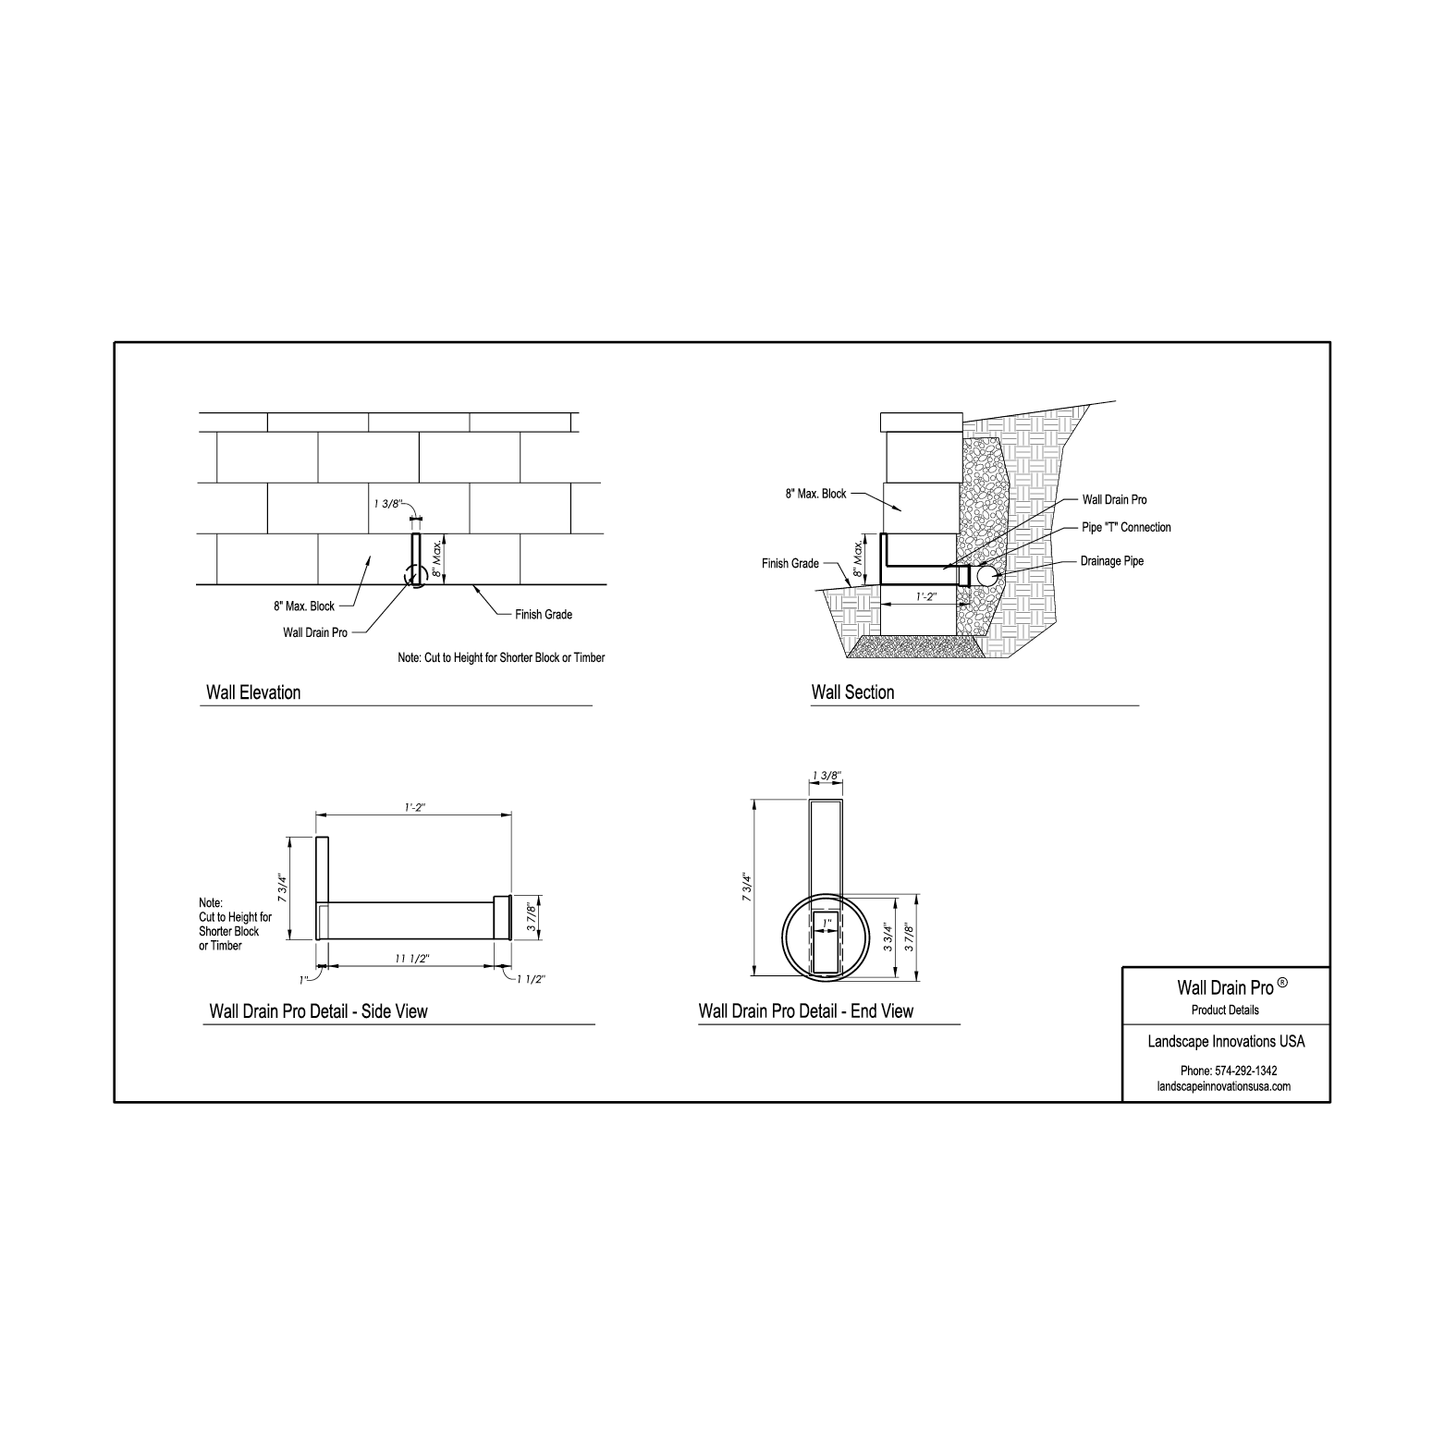 Wall drain pro product details sheet